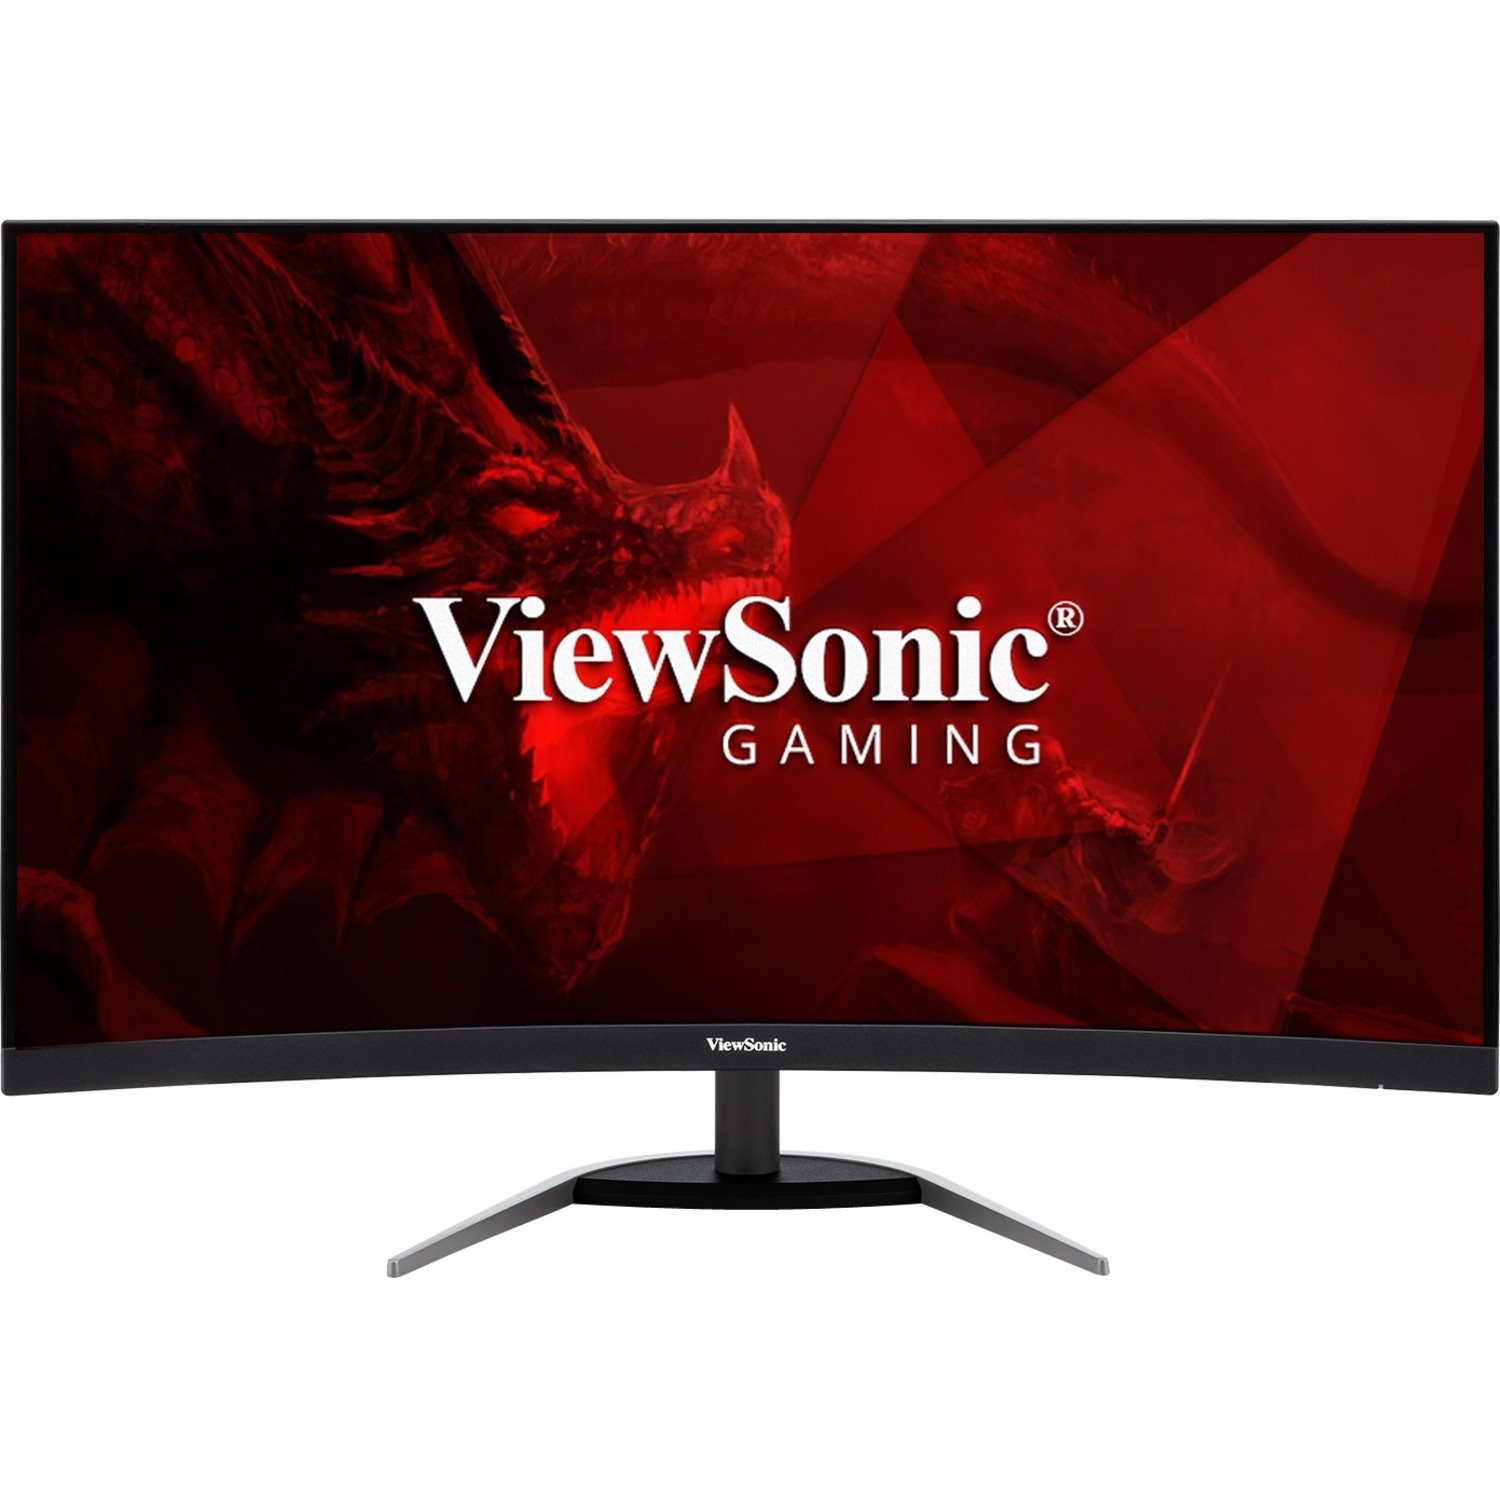 32" OMNI Curved 1080p 1ms 165Hz Gaming Monitor with FreeSync Premium